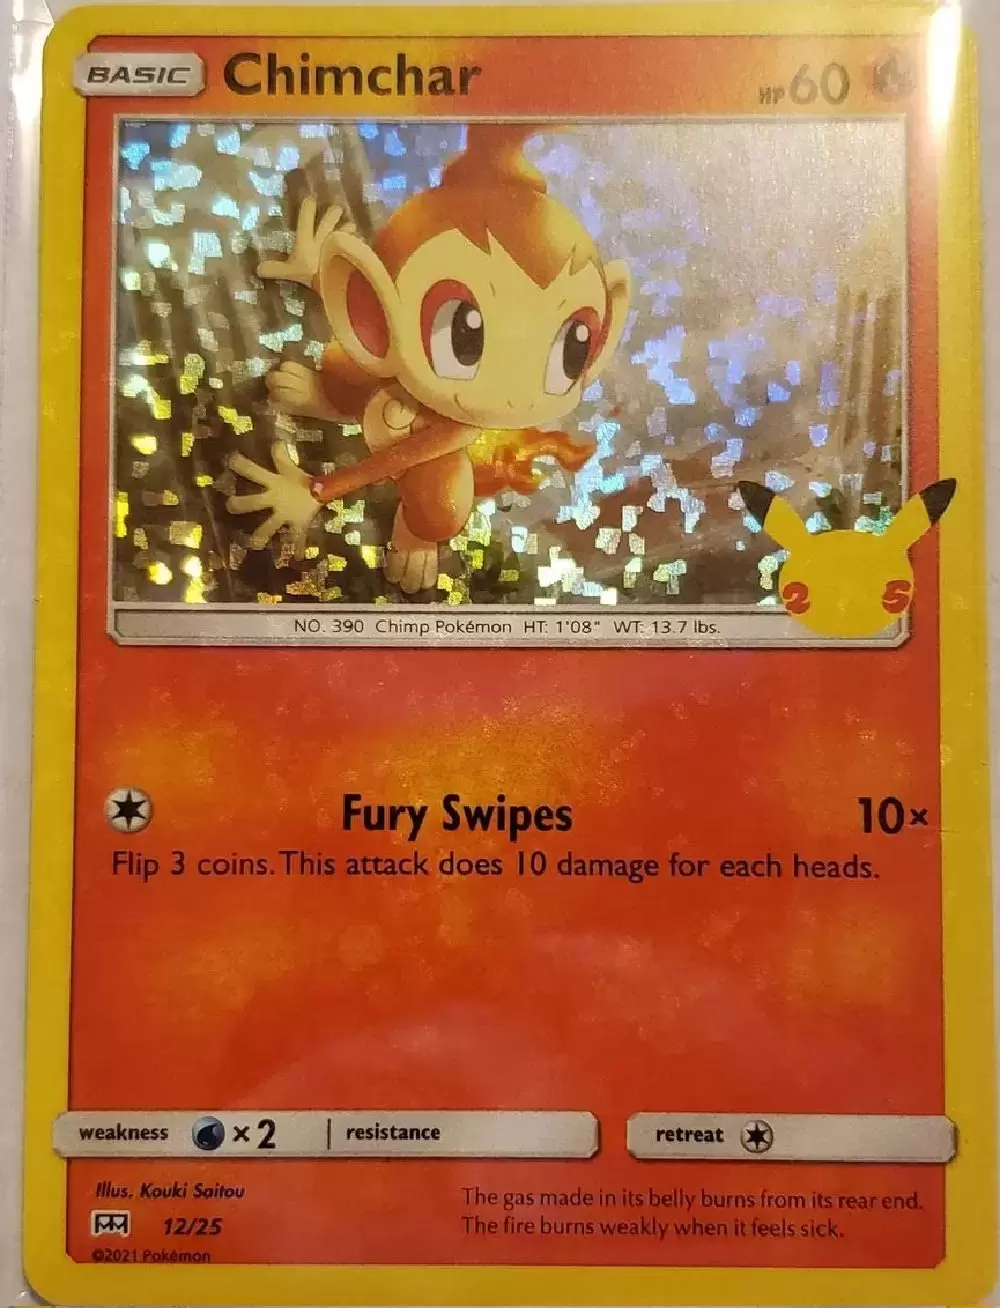 10 Most Expensive Pokemon Cards of All Time  15 of the Most Valuable  Pokémon Cards in Existence